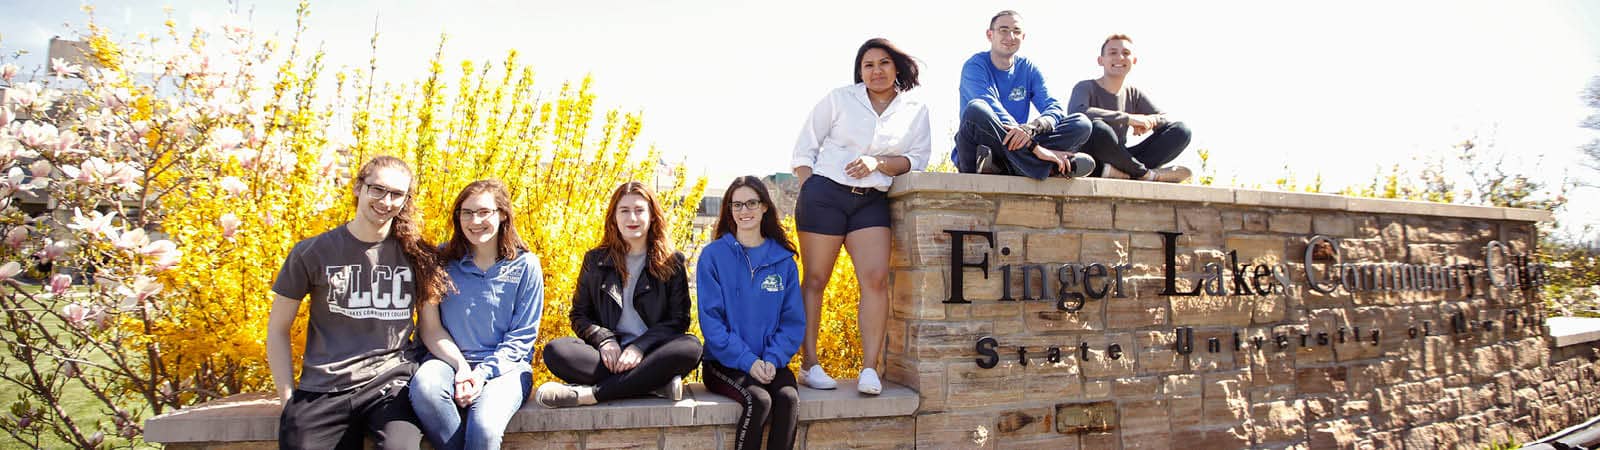 Several students standing near the FLCC sign on main campus.